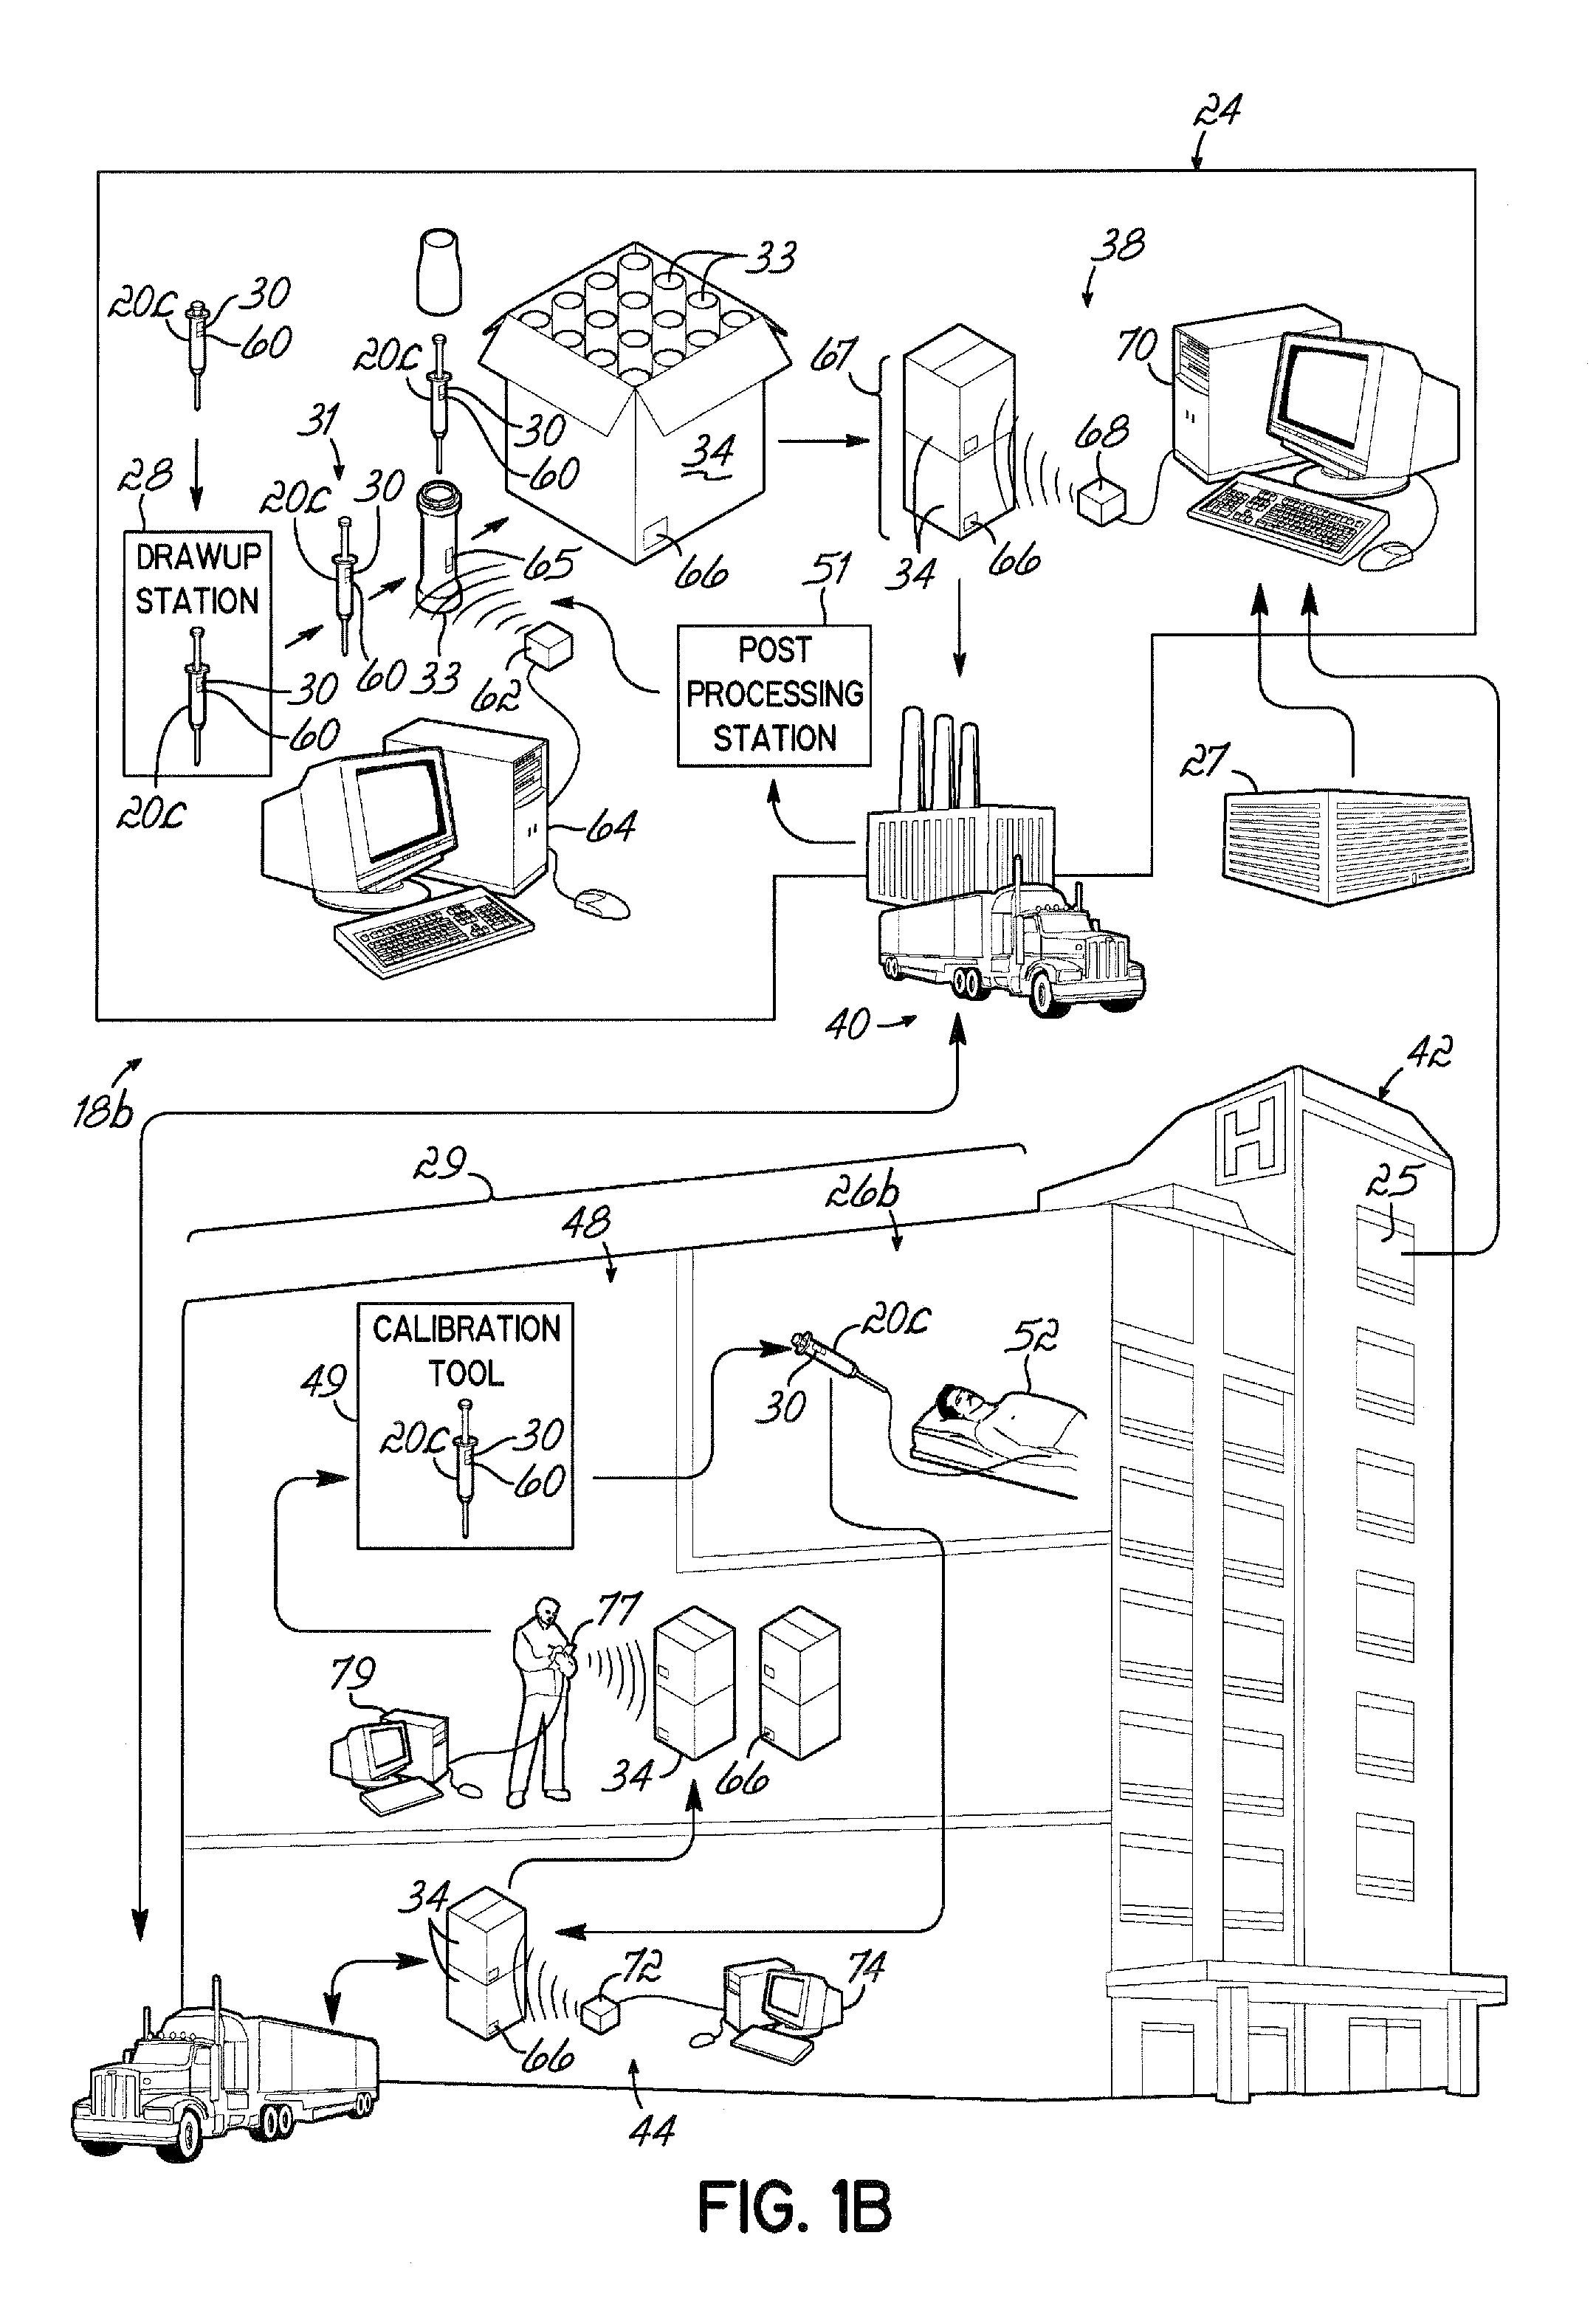 Systems and methods for managing information relating to medical fluids and containers therefor